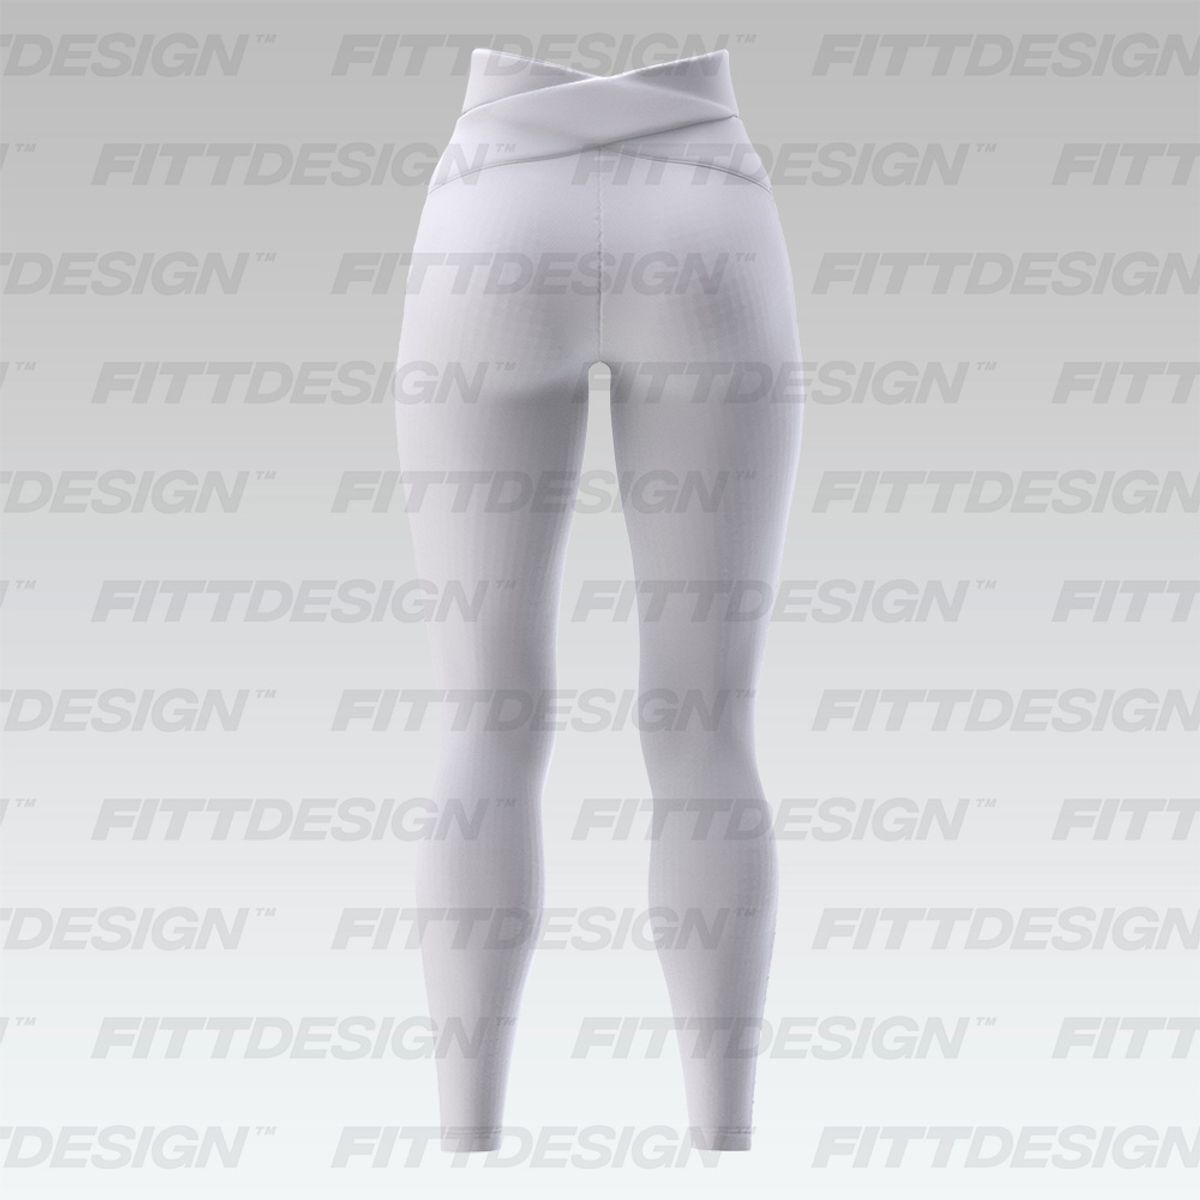 https://www.fittdesign.com/uploads/product/ladies-cut-out-criss-cross-high-waisted-leggings-smart-mockup/95c81e2a-516b-4984-a8a4-389ba9fa1eb8-mod=w=1200,h=1200.jpg